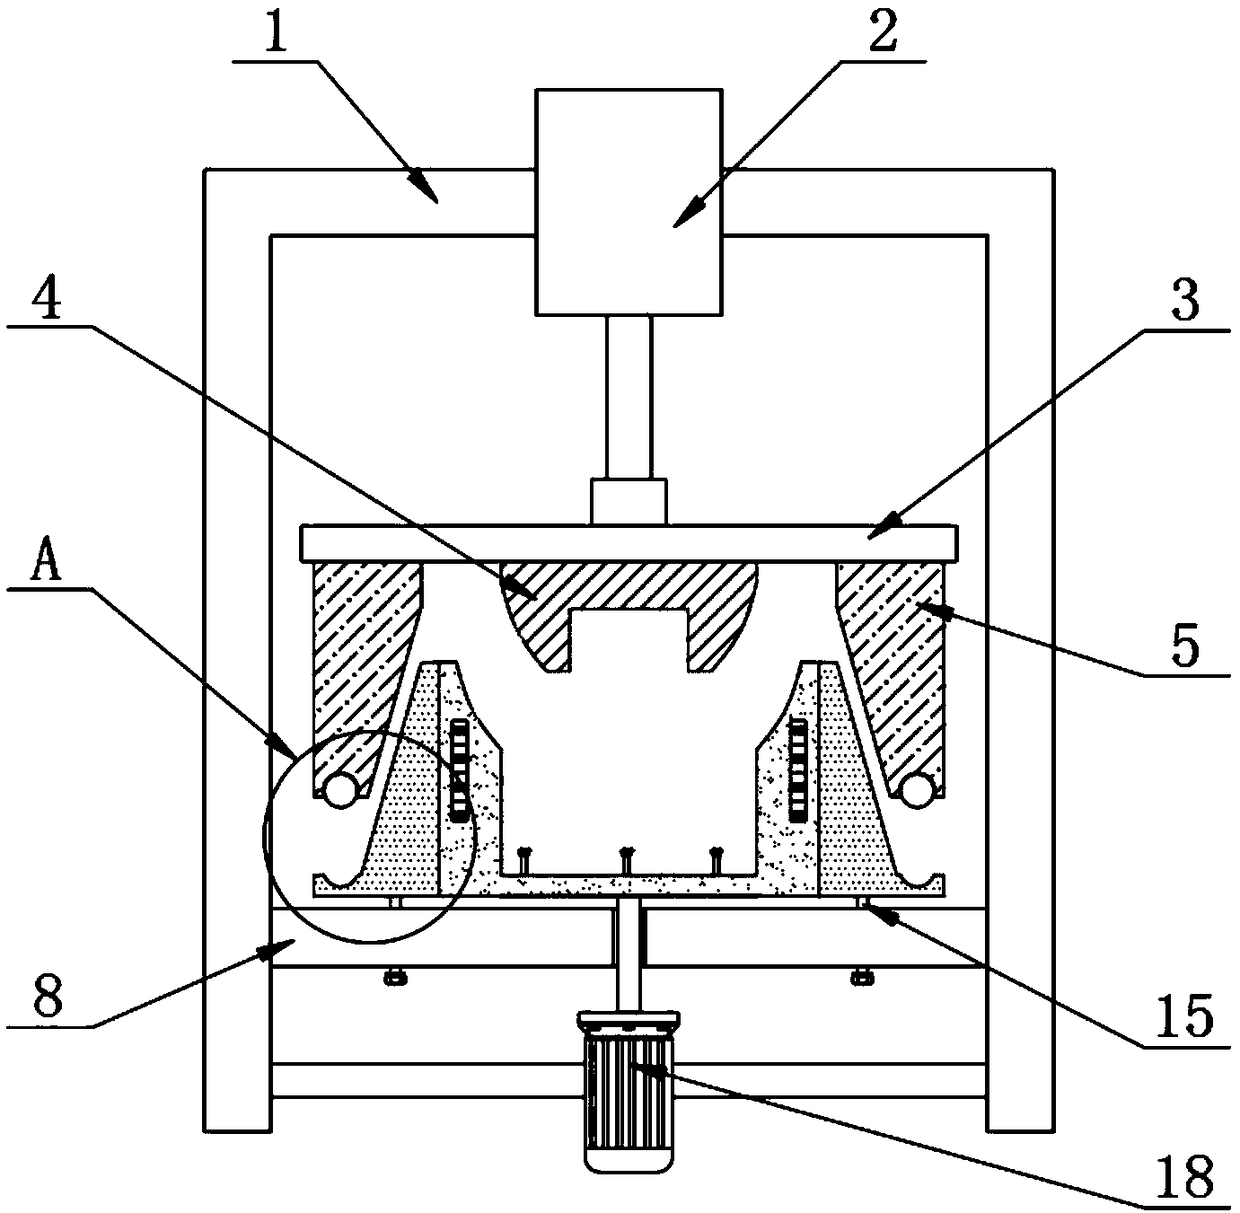 Heating and spinning flaring device